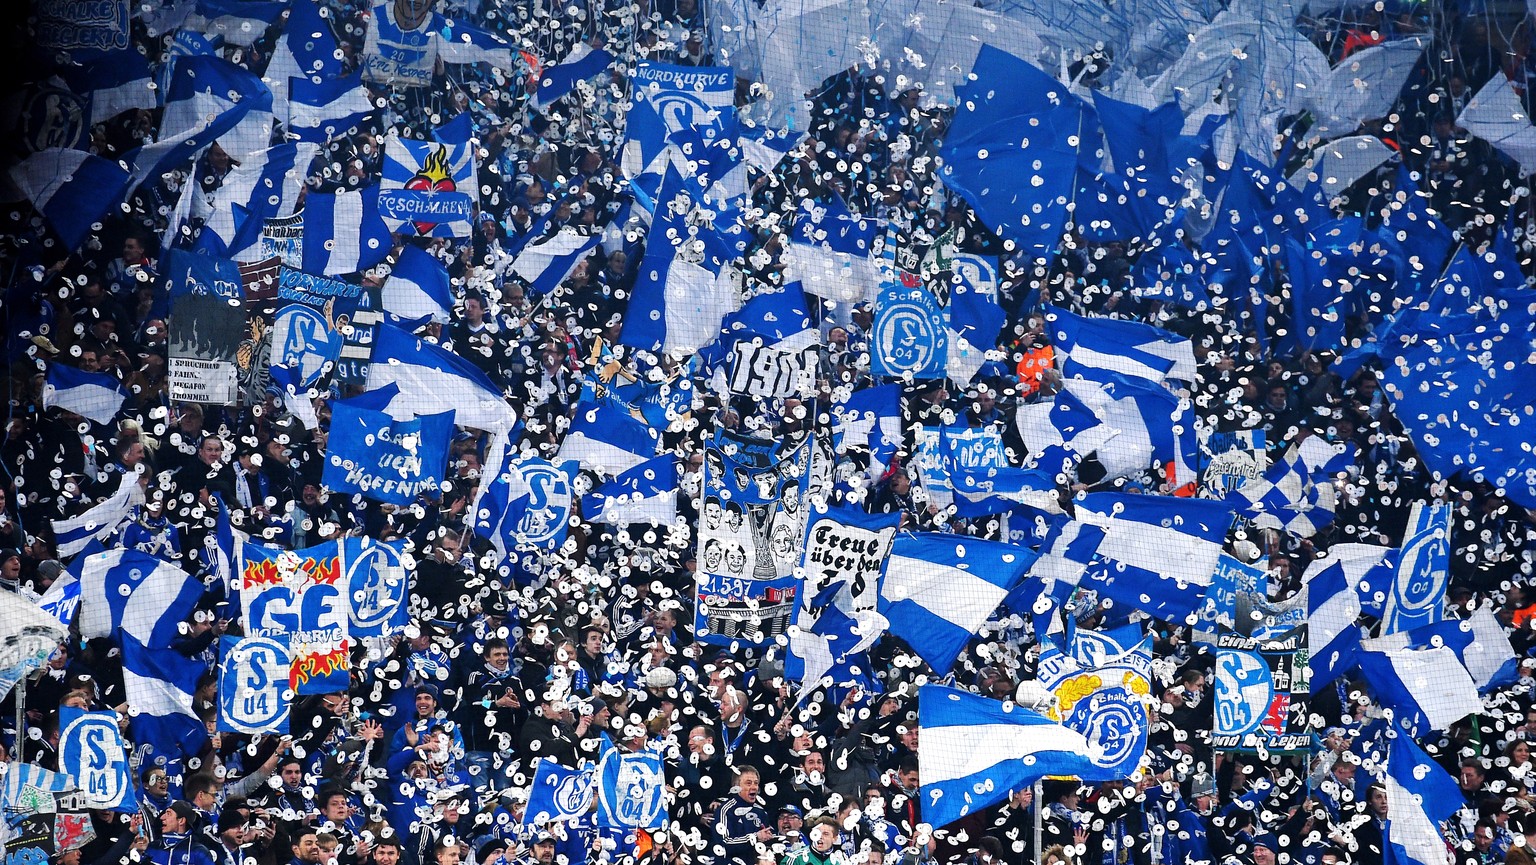 GELSENKIRCHEN, GERMANY - FEBRUARY 18: Schalke fans cheer on their team during the UEFA Champions League Round of 16 match between FC Schalke 04 and Real Madrid at the Veltins-Arena on February 18, 201 ...